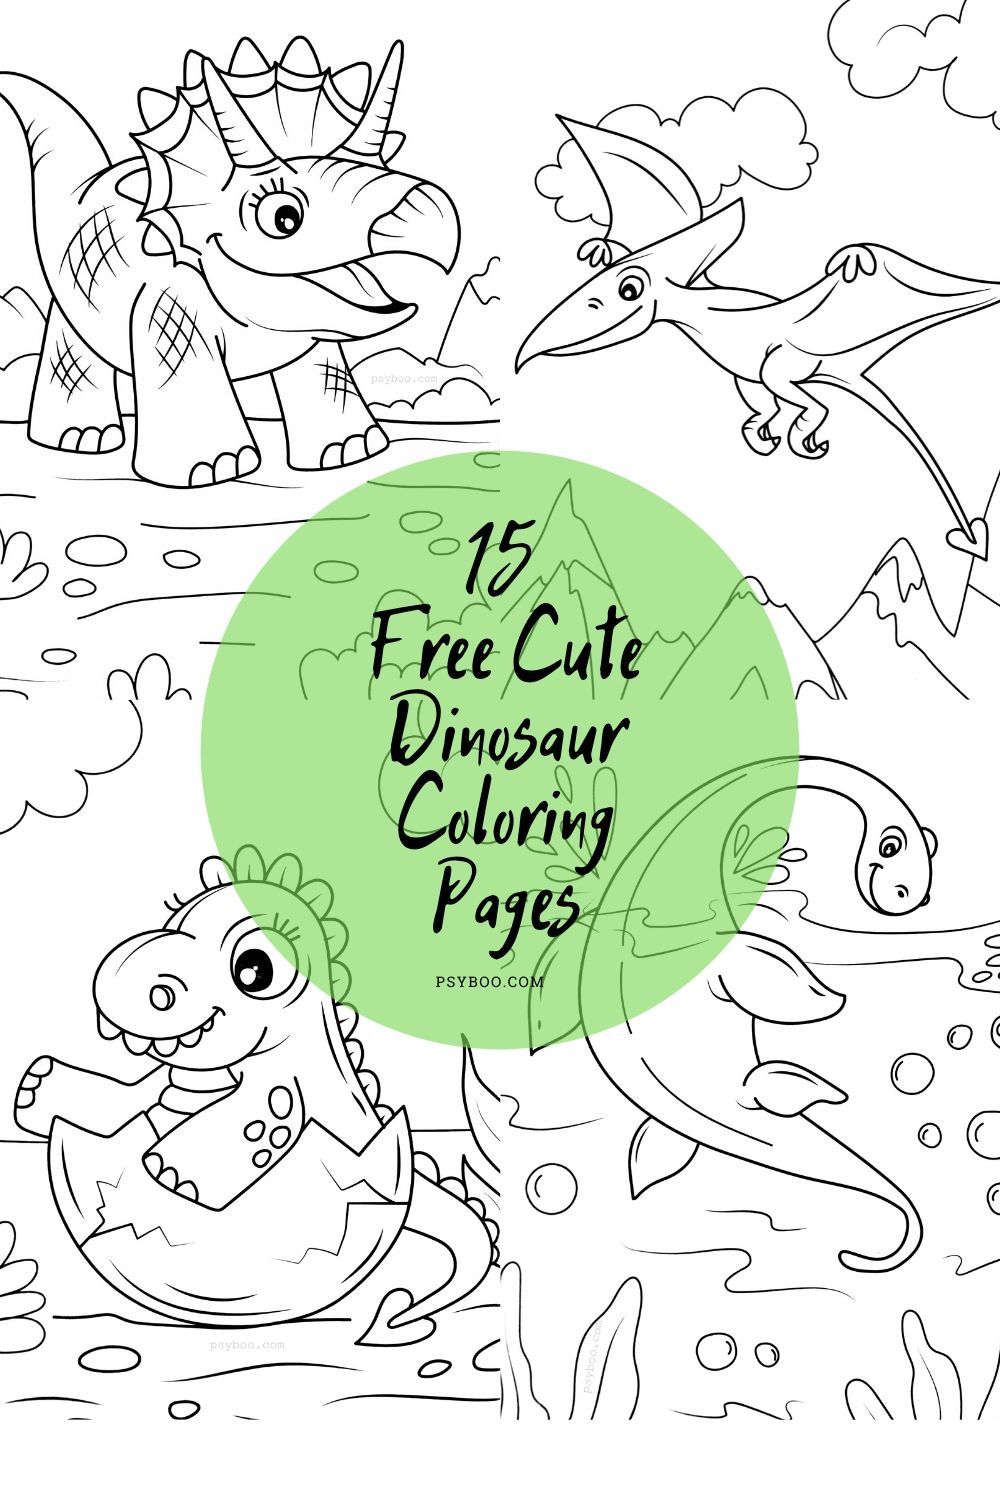 15 Cute Dinosaur Coloring Pages for FREE